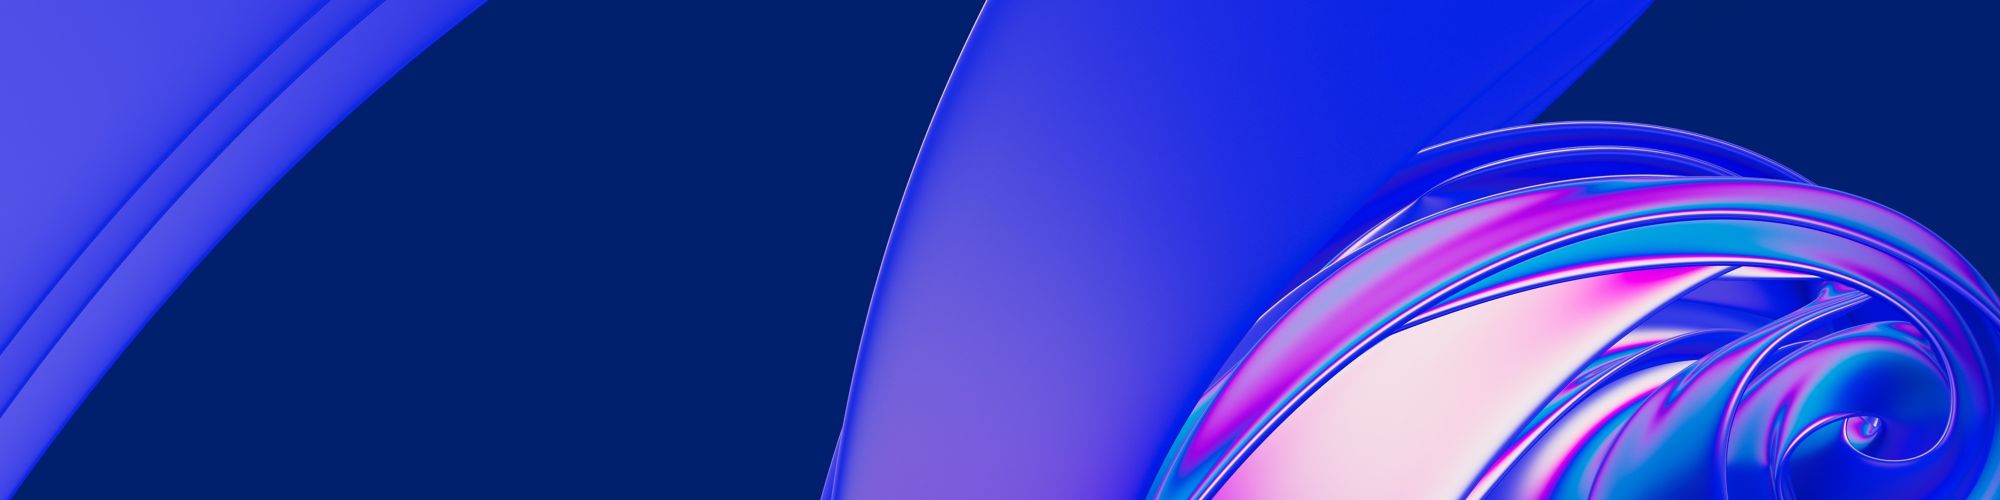 id-abstract-blue-navy-bule-wave-background